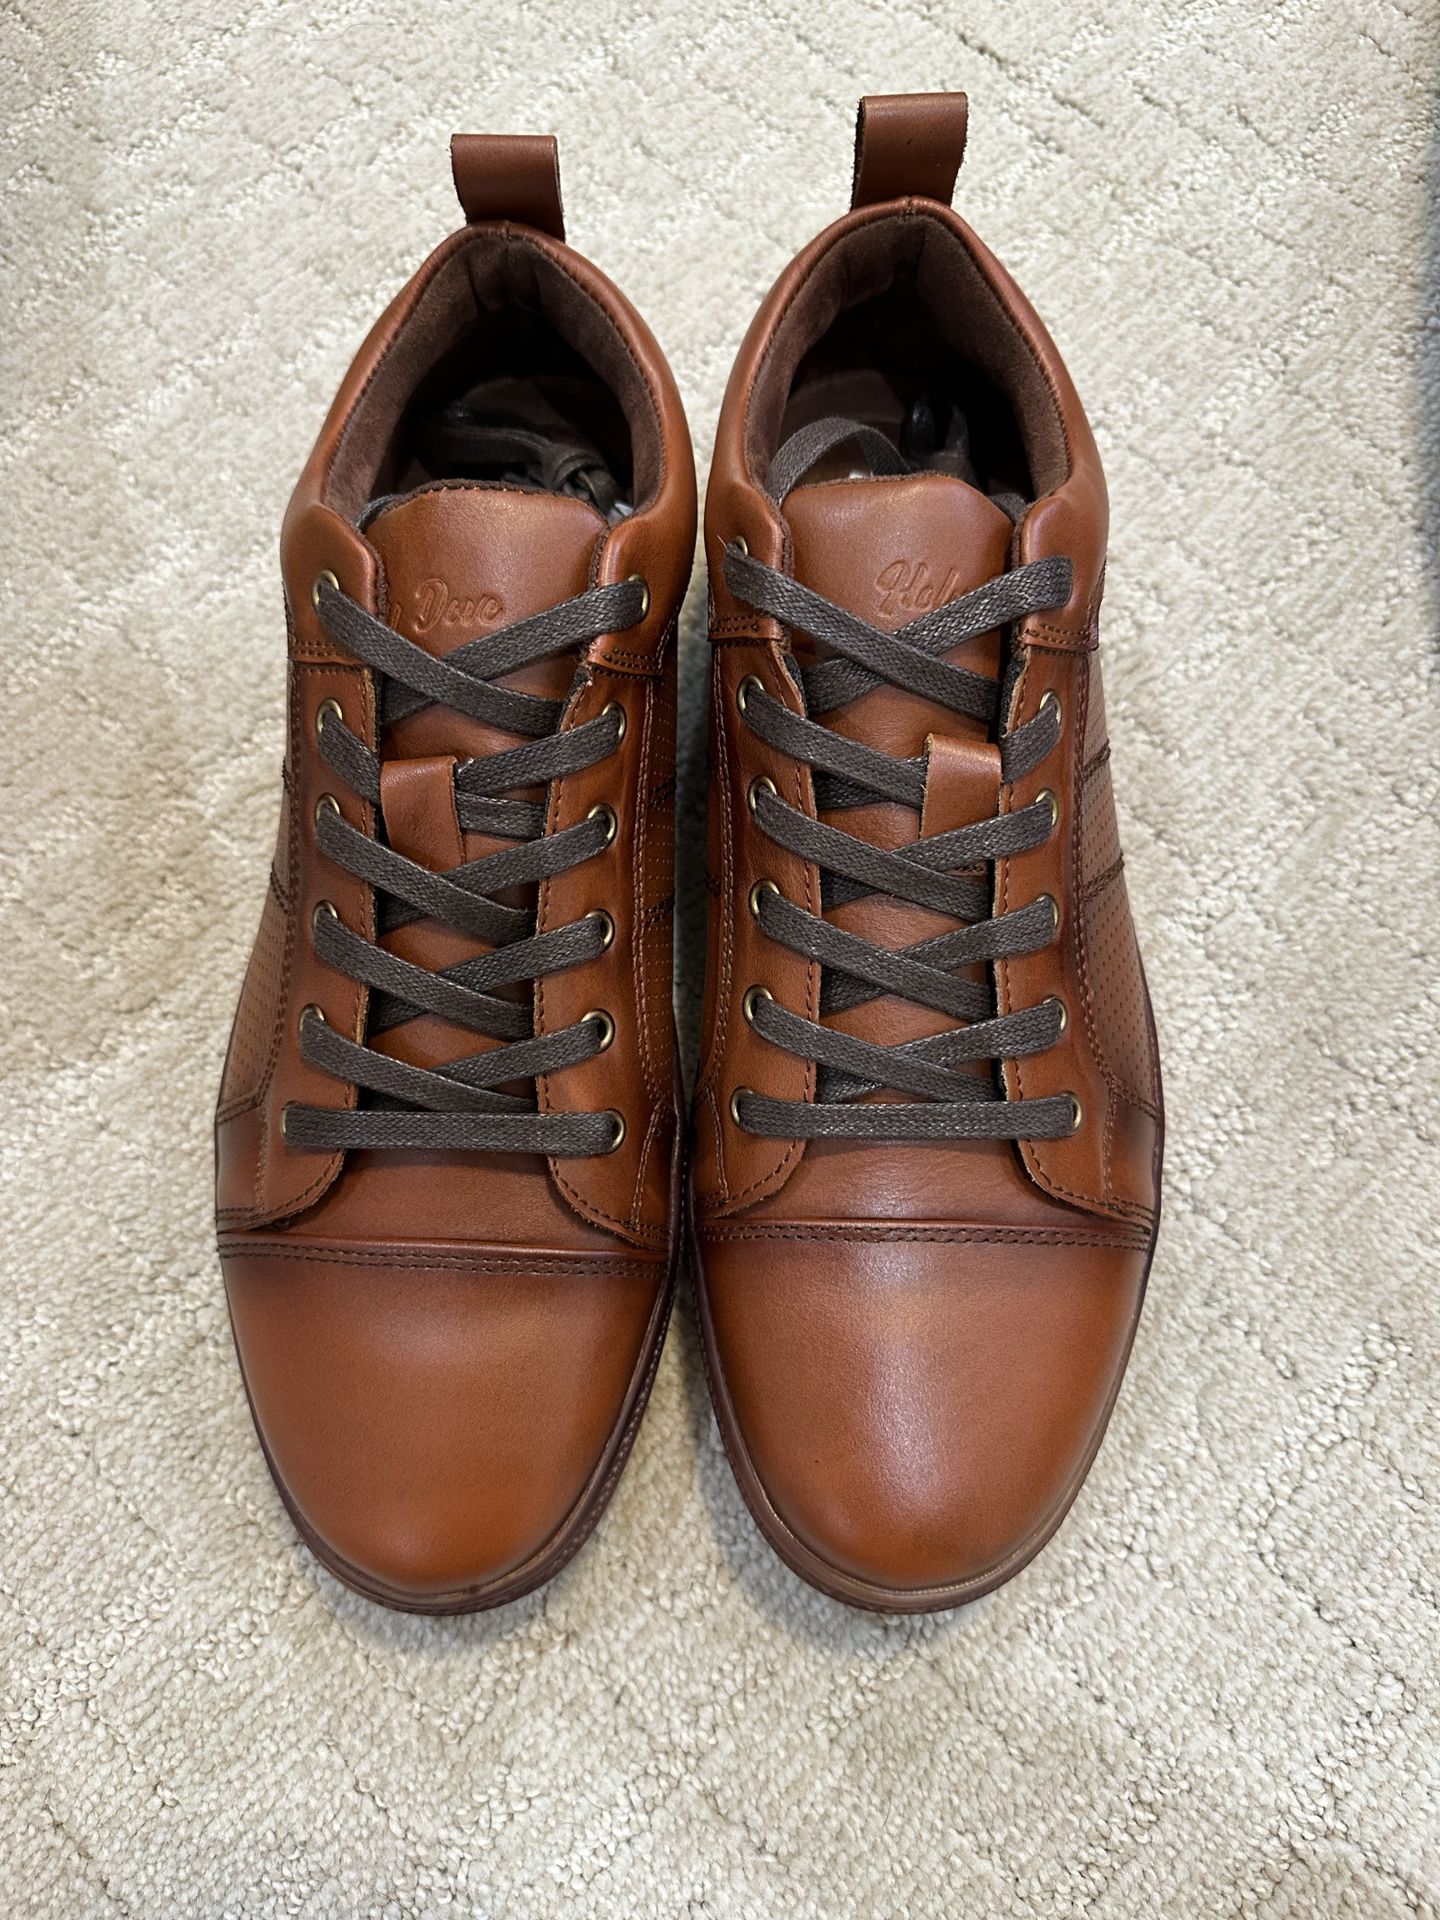 Men’s Casual Oxford Sneakers (brown) Size 9.5